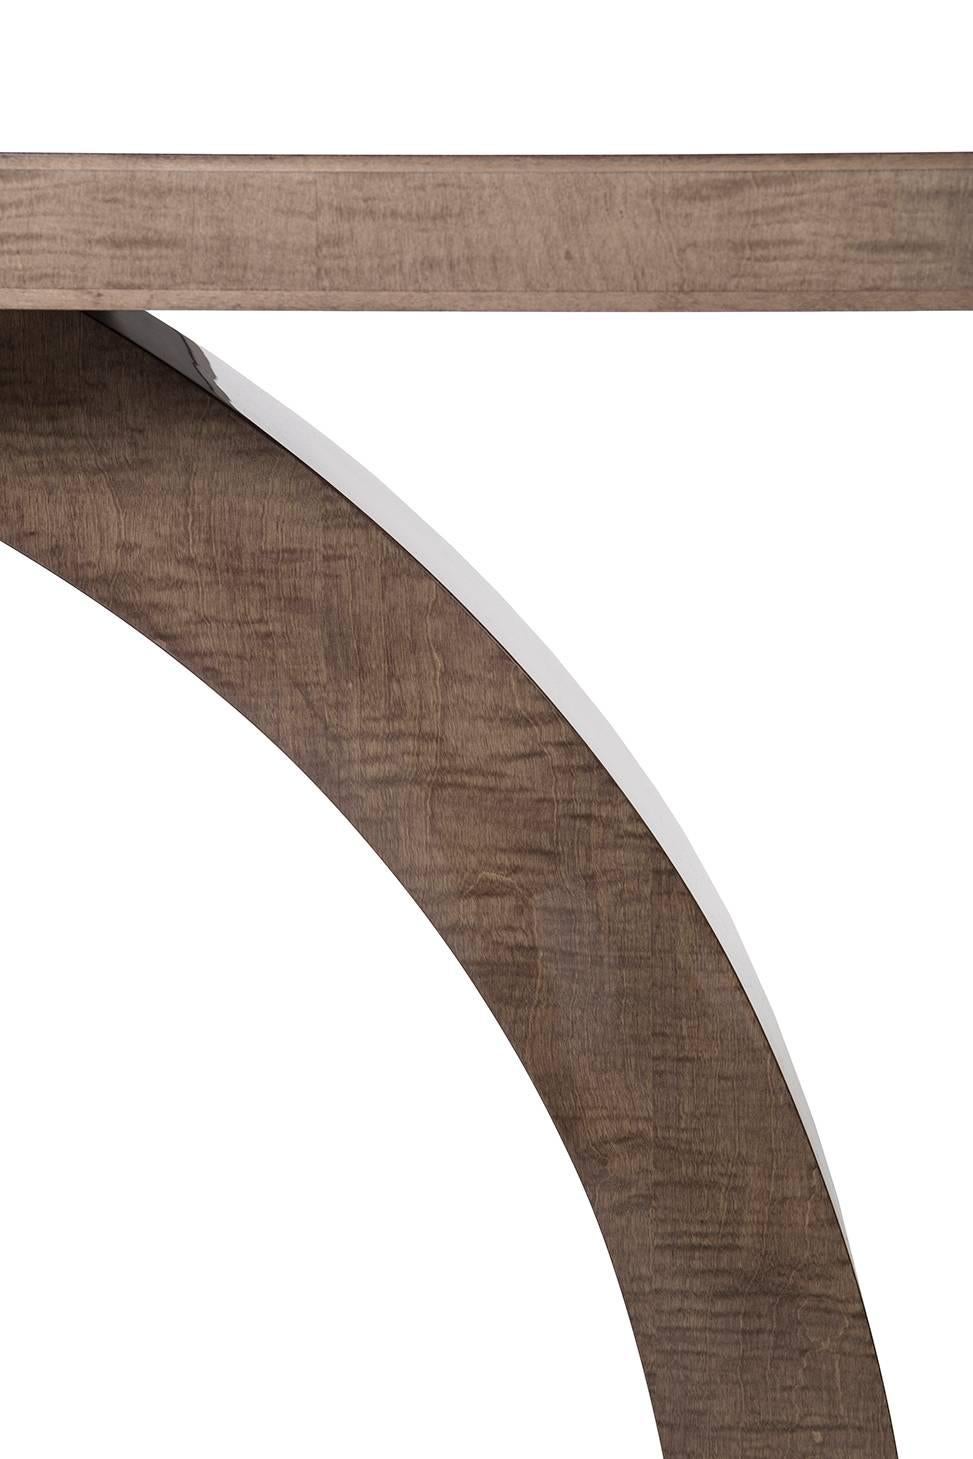 British Davidson's Modern, Stanbury Console Table, Sycamore Dusk Wood and Polished Brass